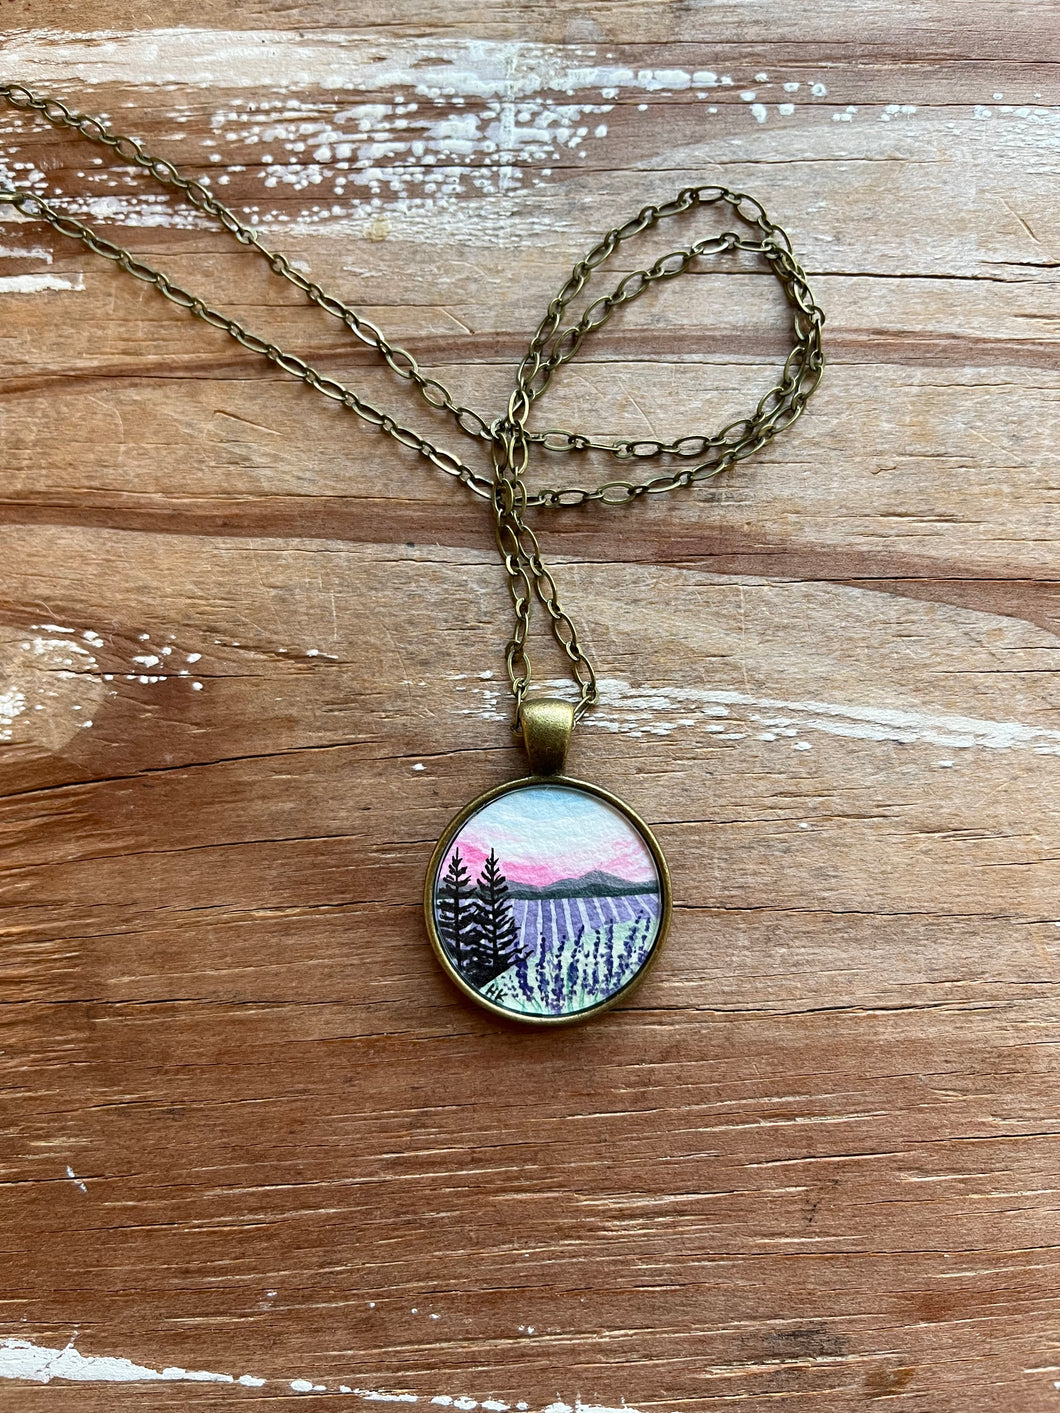 Lavender Field with Pink Sky Landscape Art, Hand Painted Necklace, Original Watercolor Painting